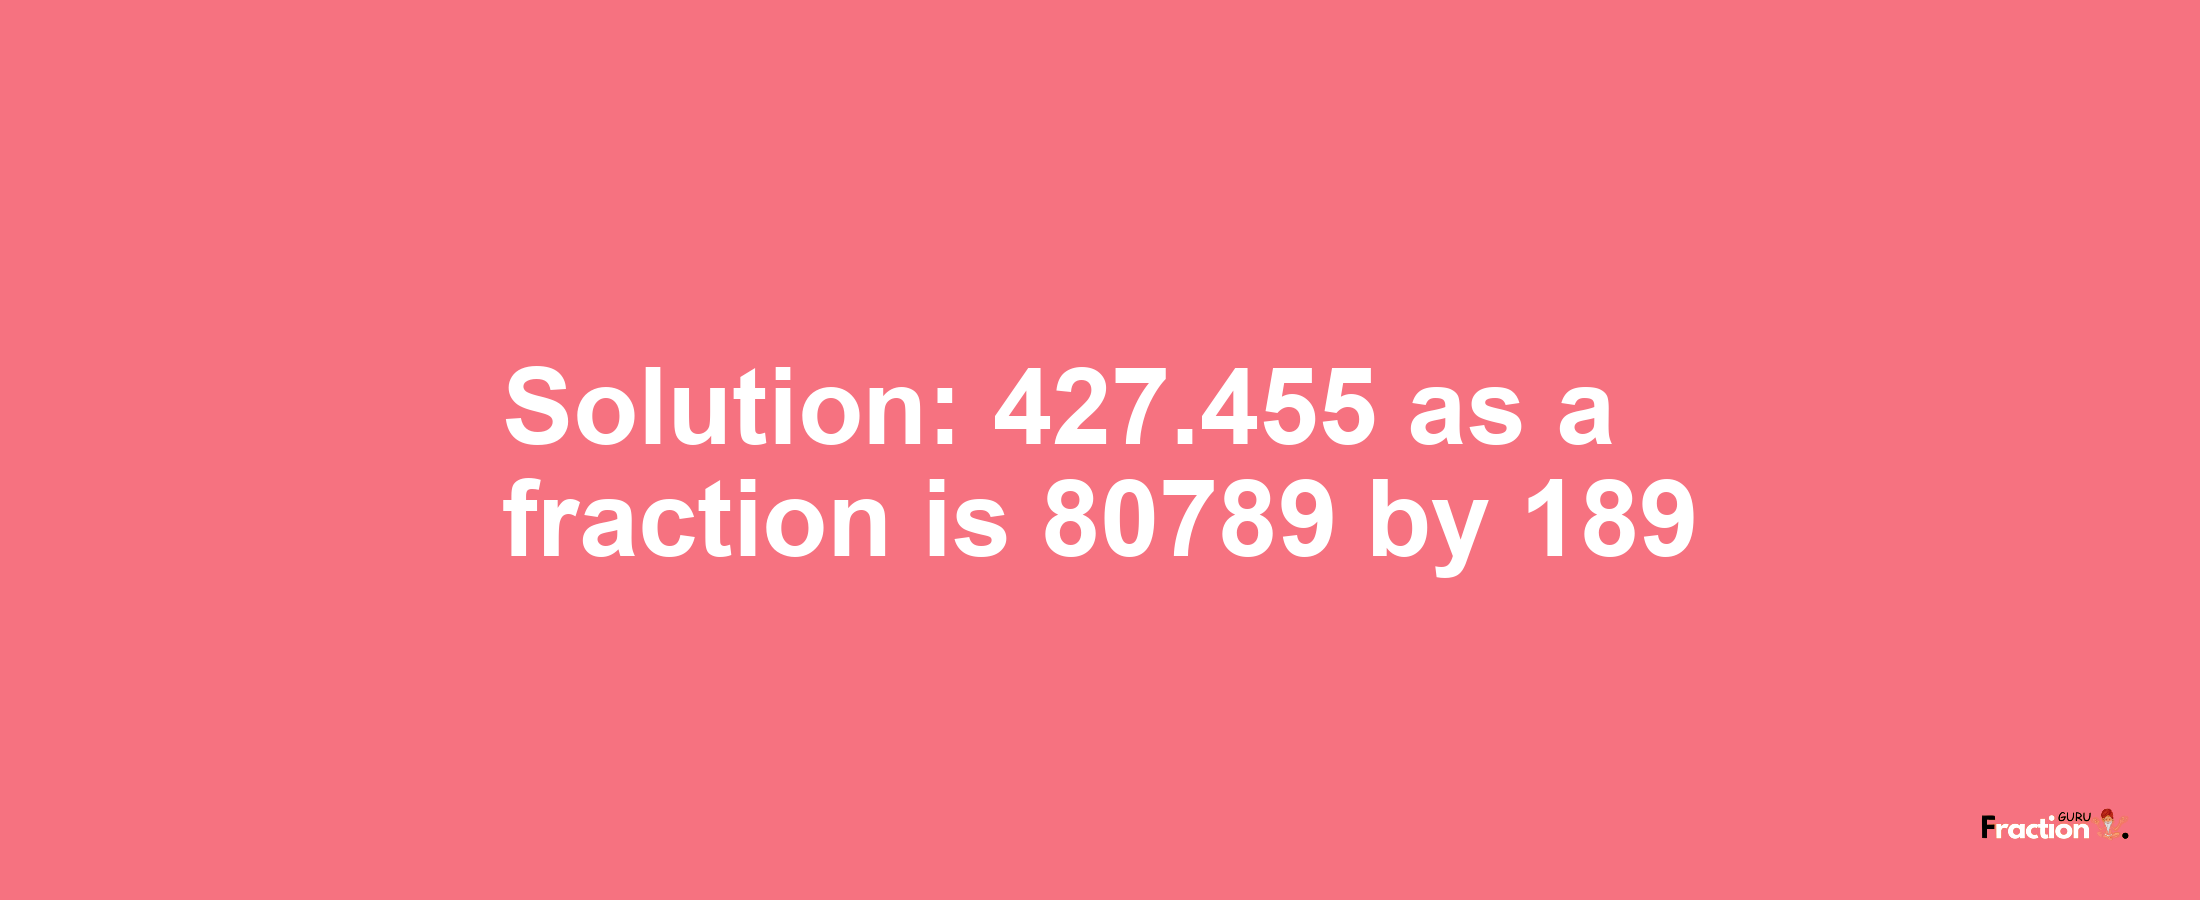 Solution:427.455 as a fraction is 80789/189